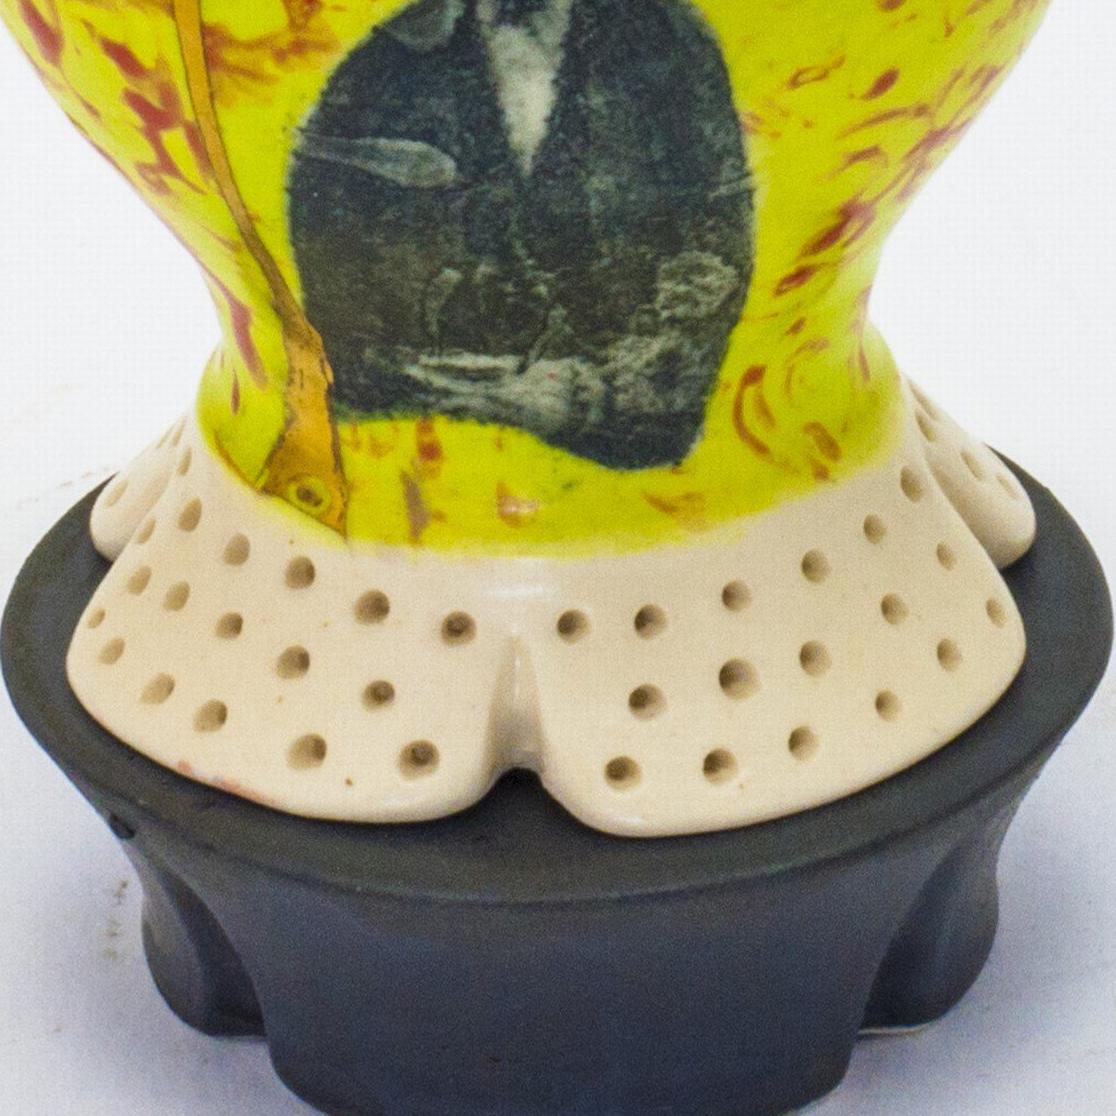 Lithograph printed cup with stand  - Contemporary Sculpture by Theresa Robinson